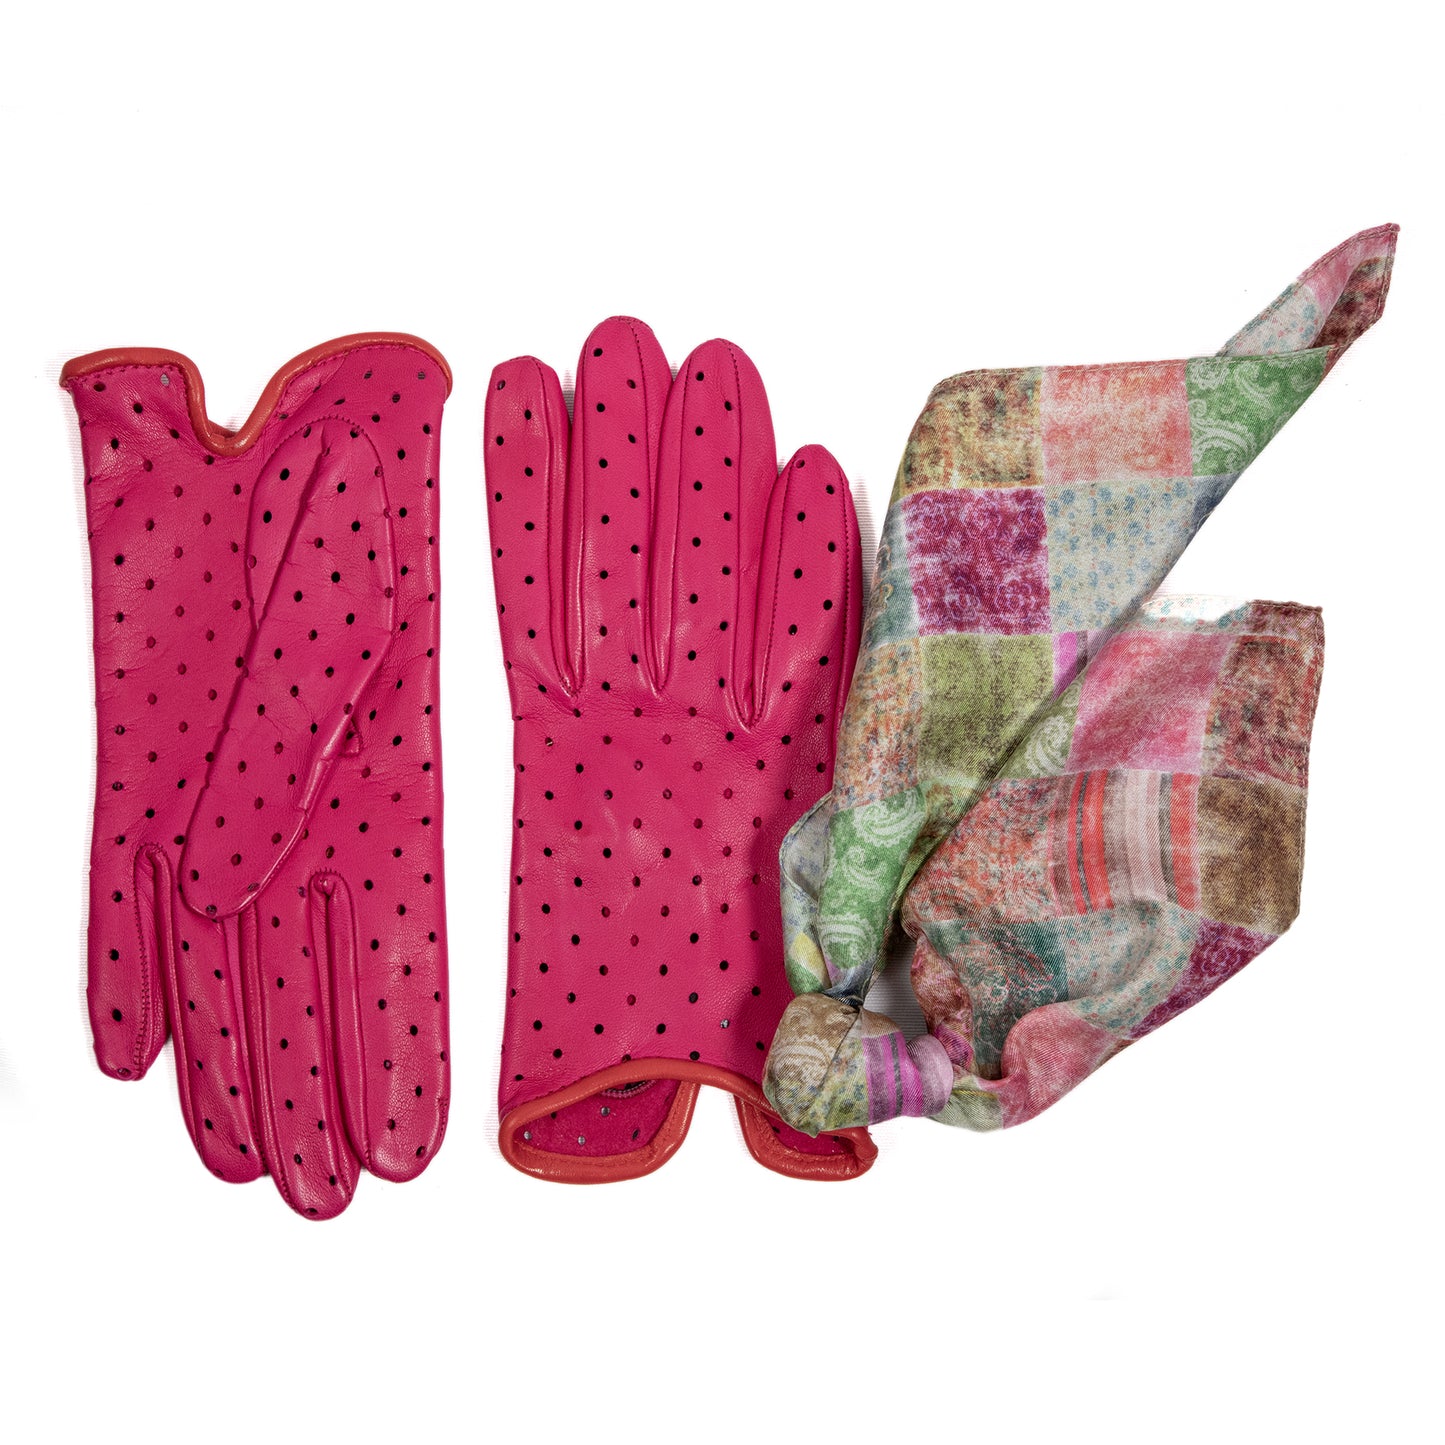 Women's unlined fucsia nappa leather gloves with perforated pois detail